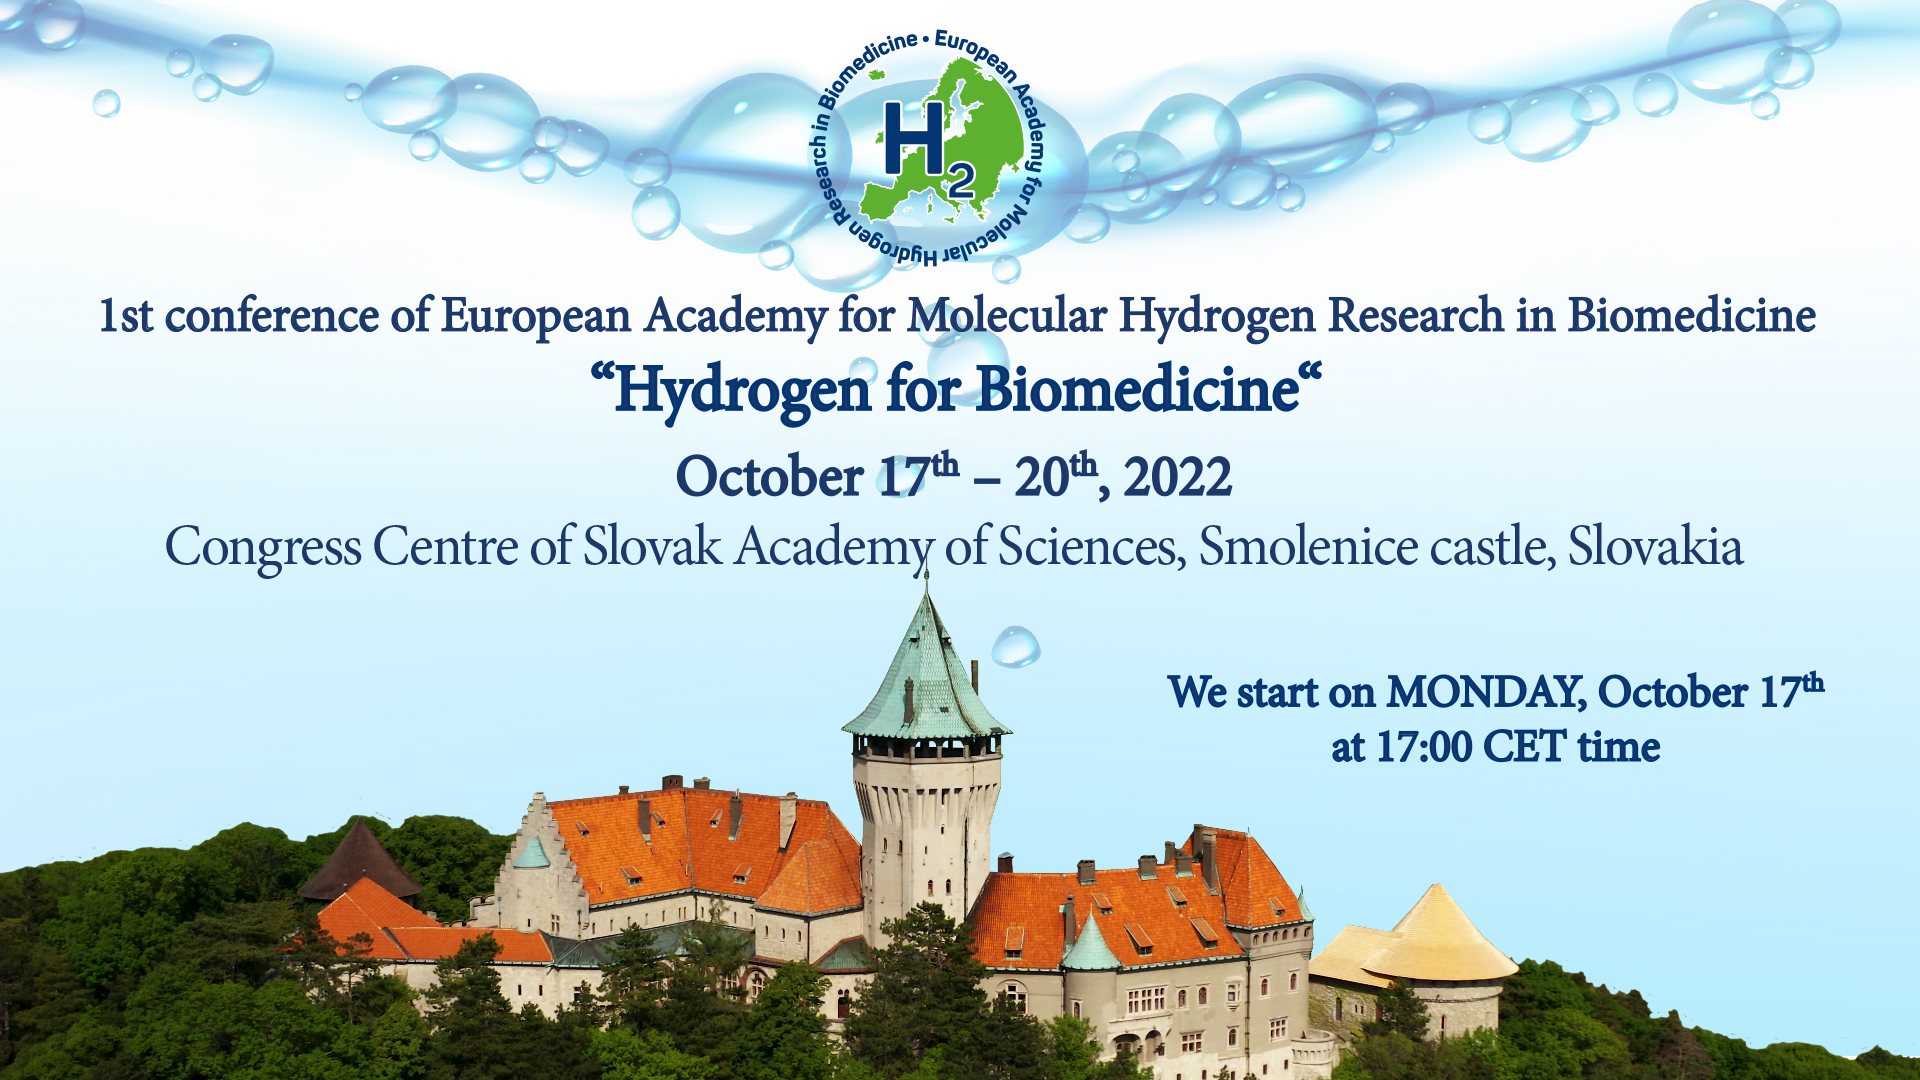 1st Conference of European Academy for Molecular Hydrogen Research in Biomedicine